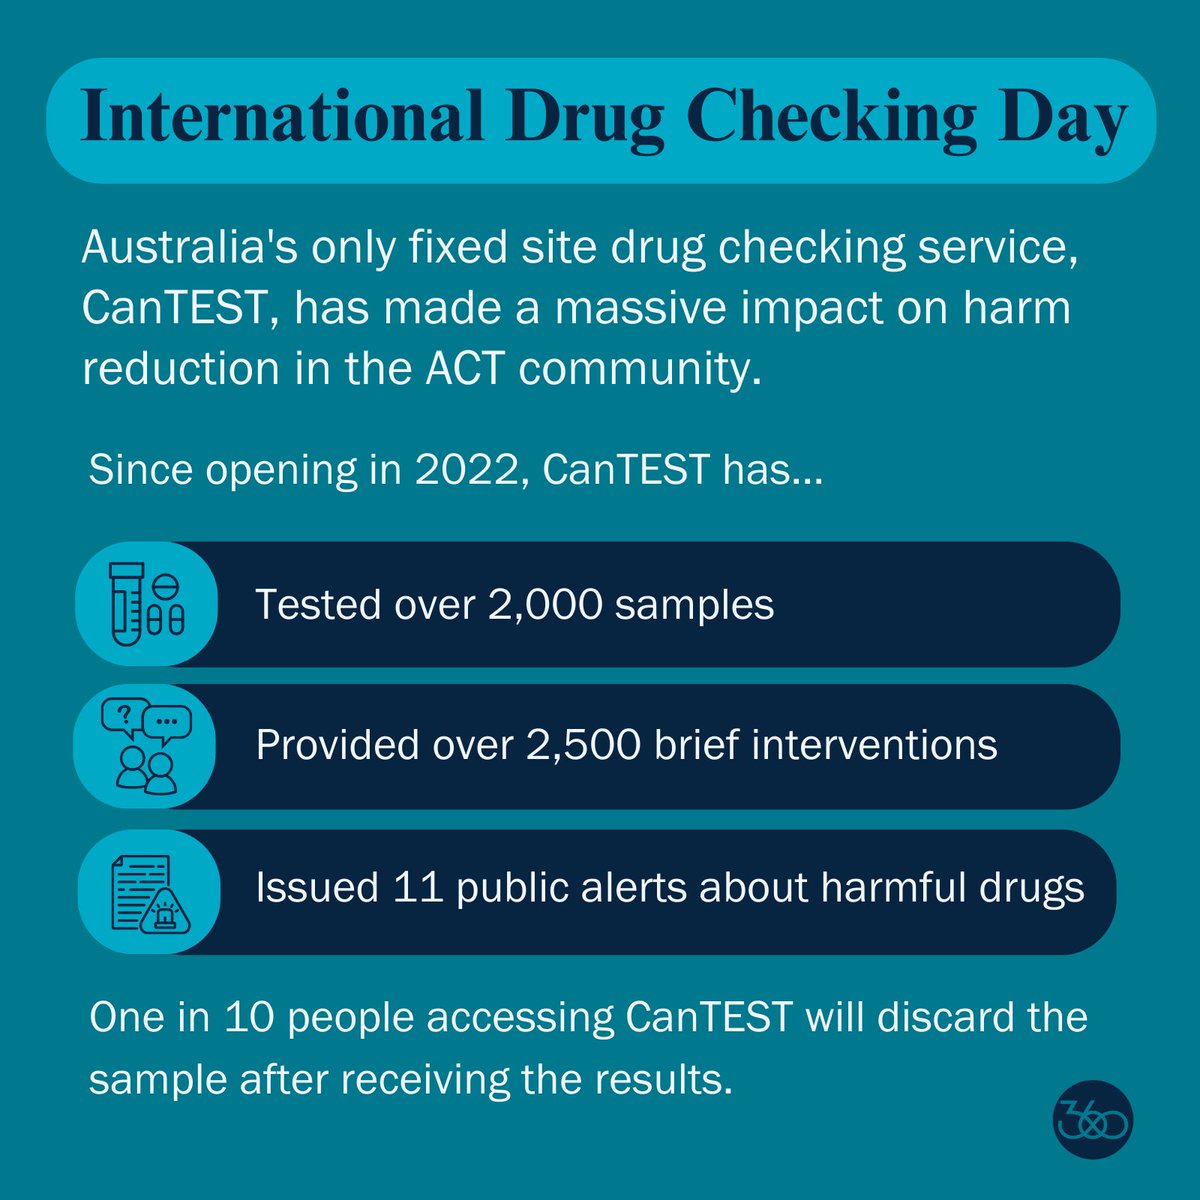 Today is an ideal opportunity to highlight how drug checking saves lives here in Australia. With continuing drug related hospitalisations & deaths happening across the country, it is integral that other governments follow the ACT's approach & commit to harm reduction. @canTESTCBR